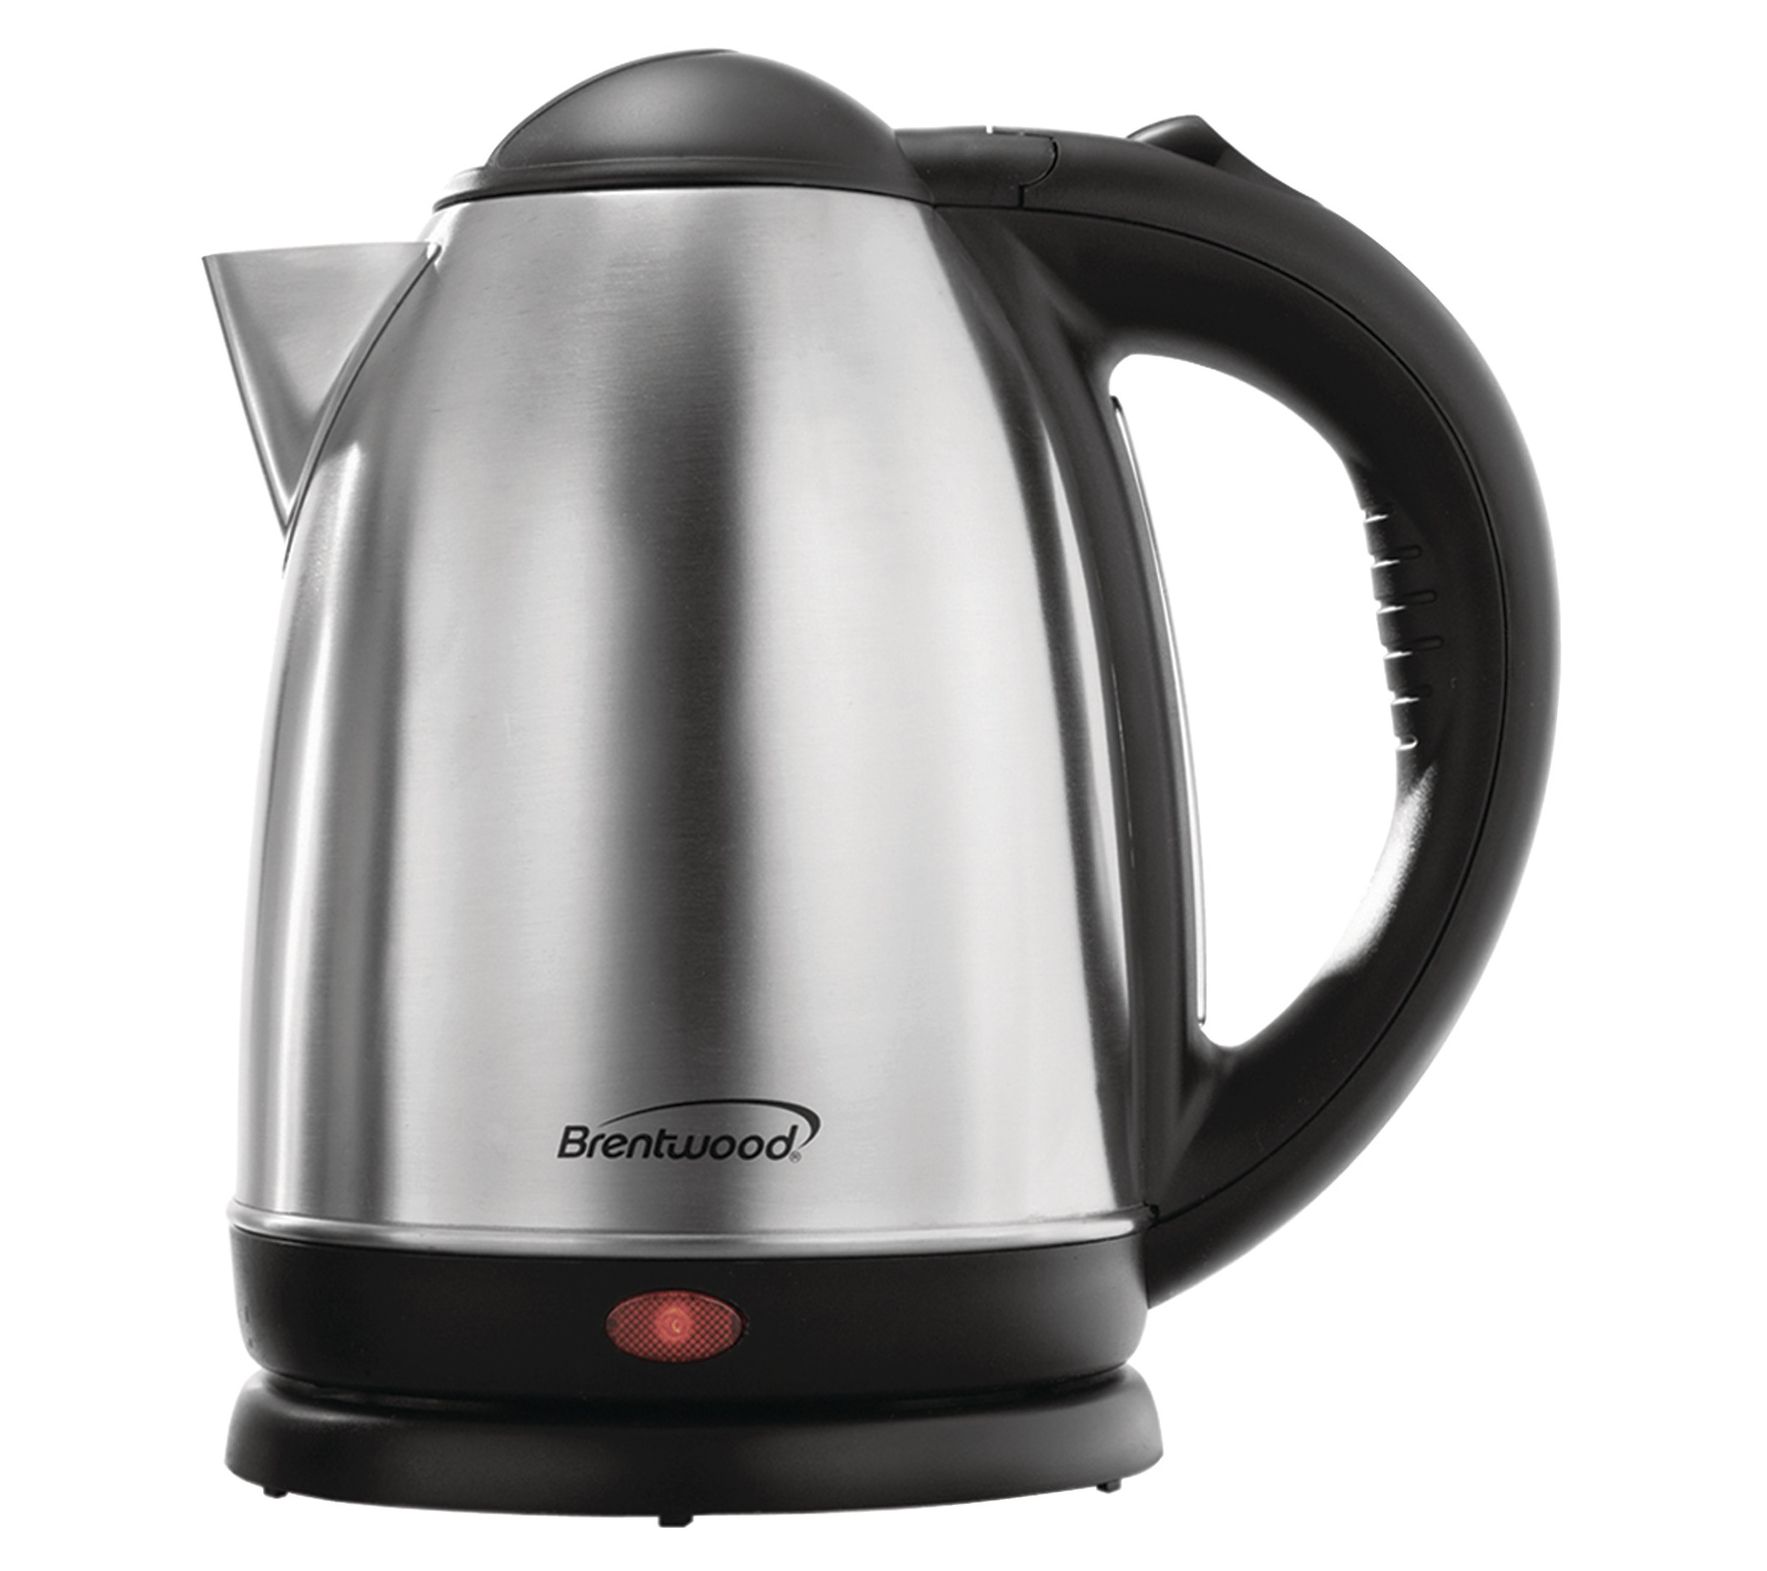 MegaChef 1.7 Liter Stainless Steel Electric Tea Kettle With 5